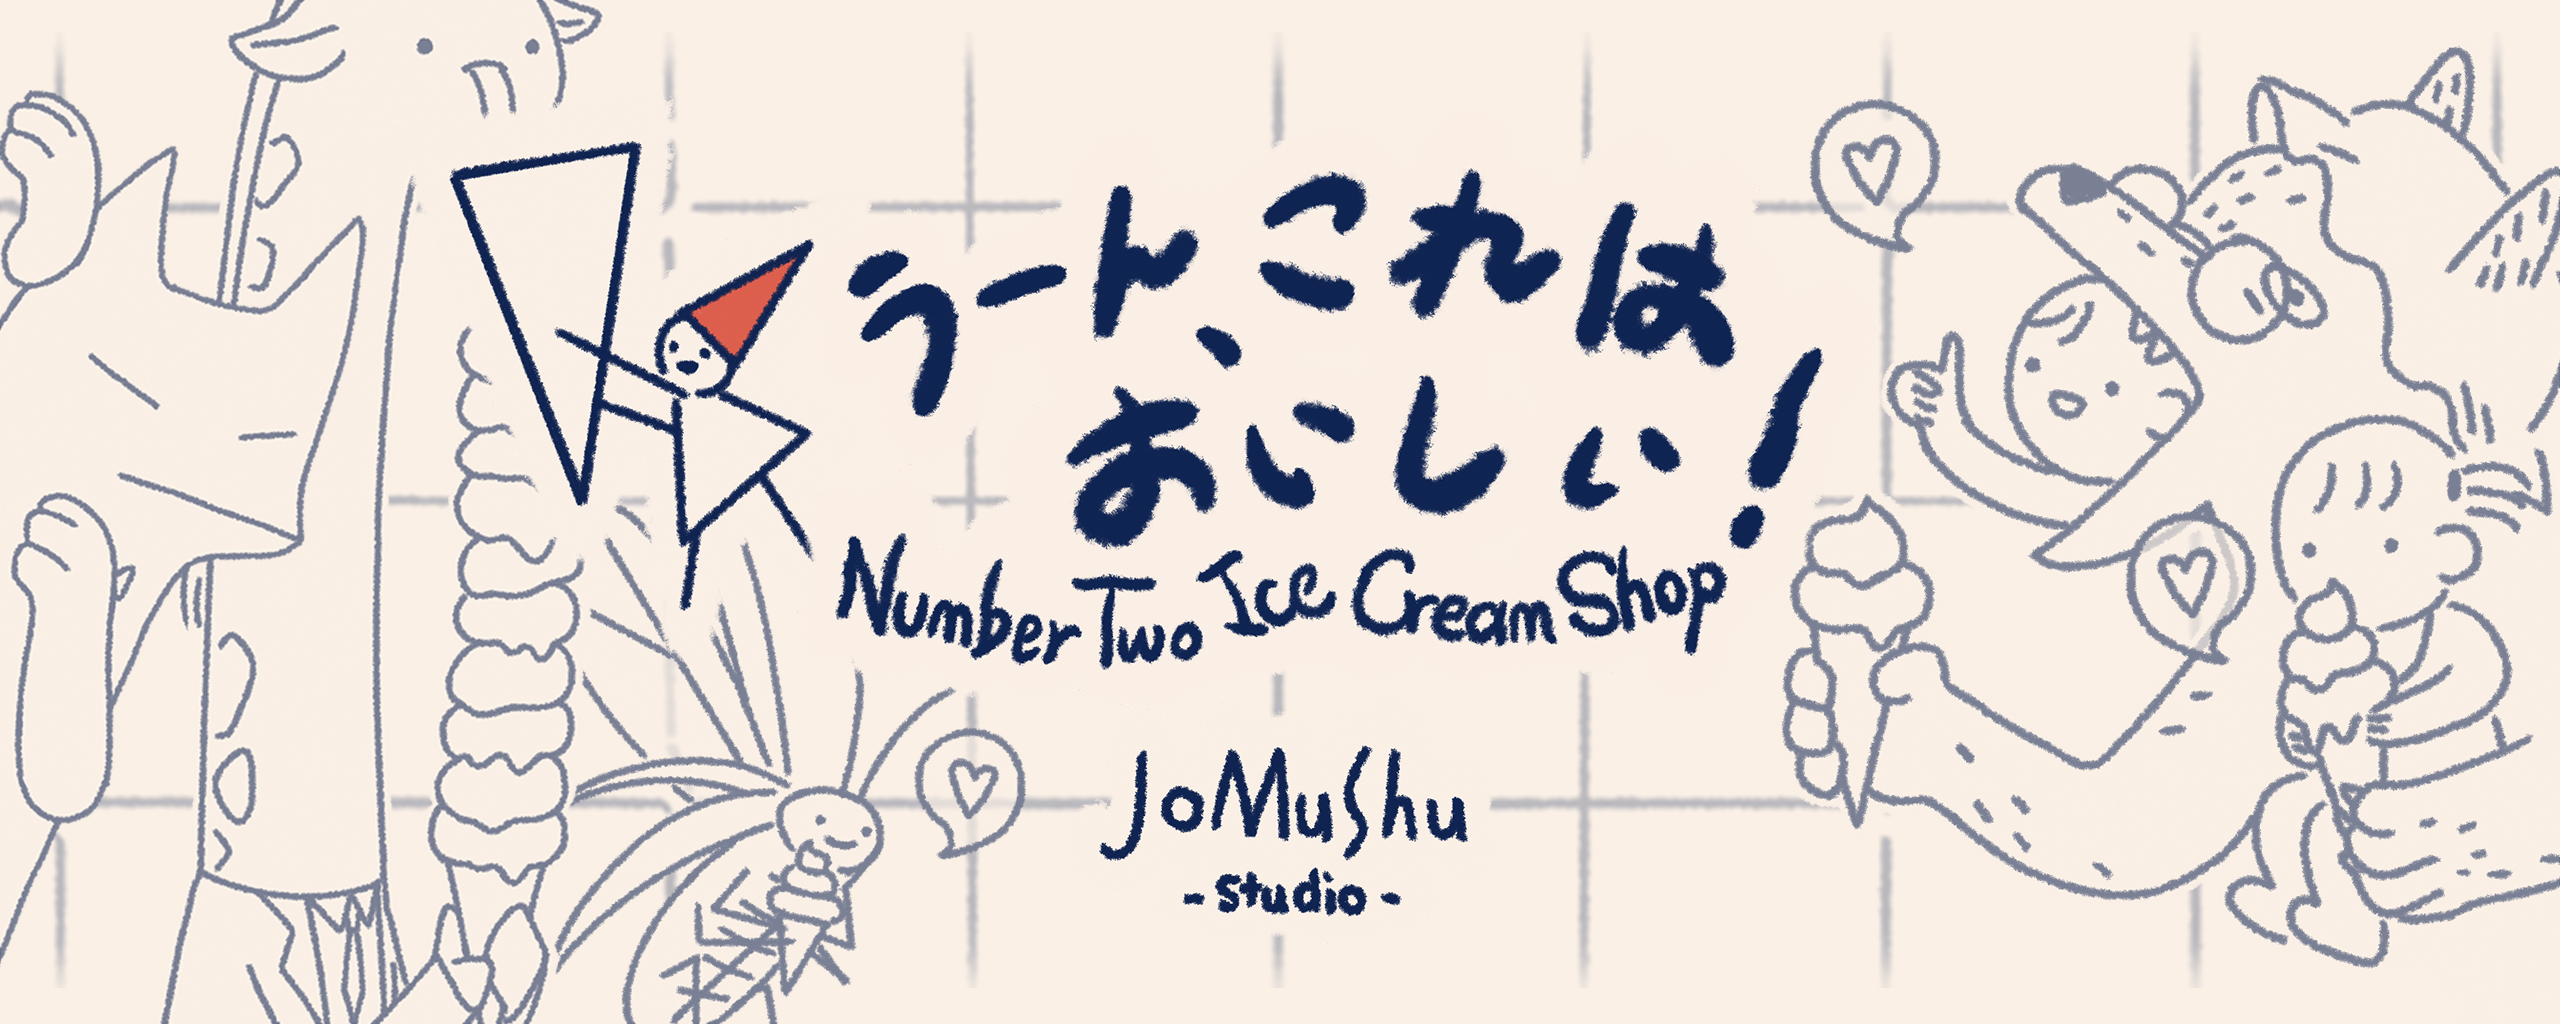 Number Two Ice Cream Shop!